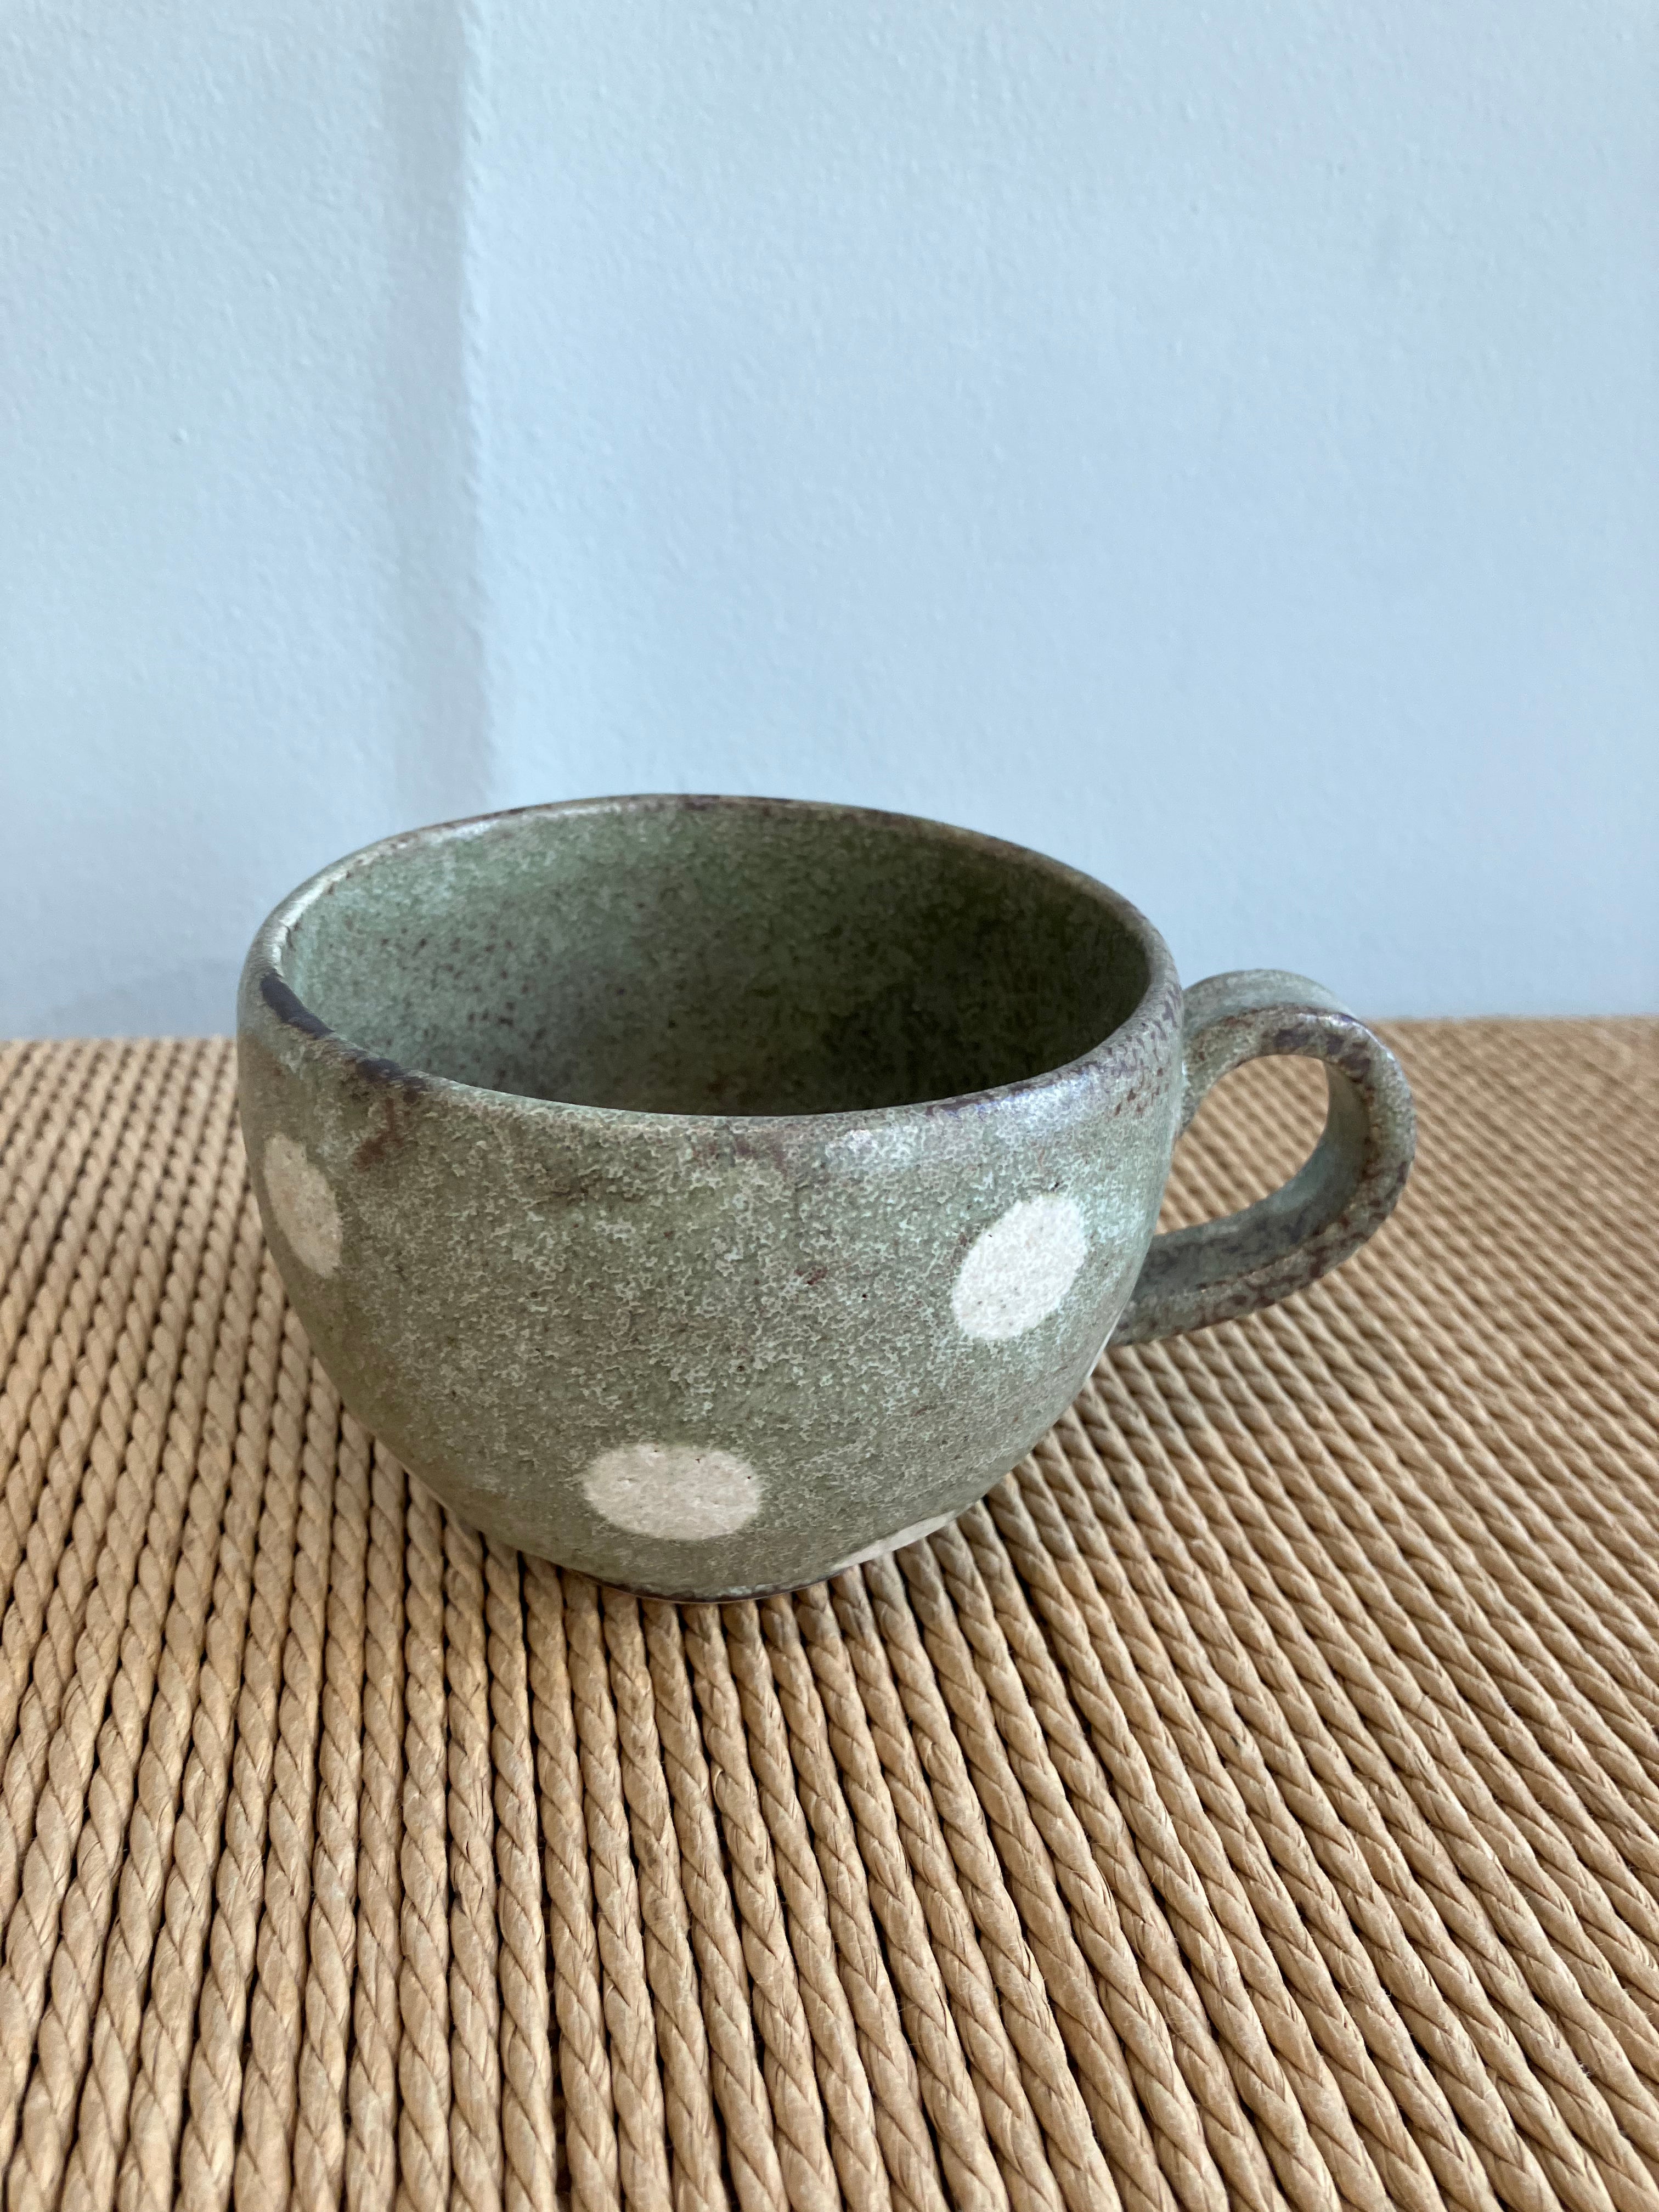 Japanese ceramic cup with green glaze and white dots